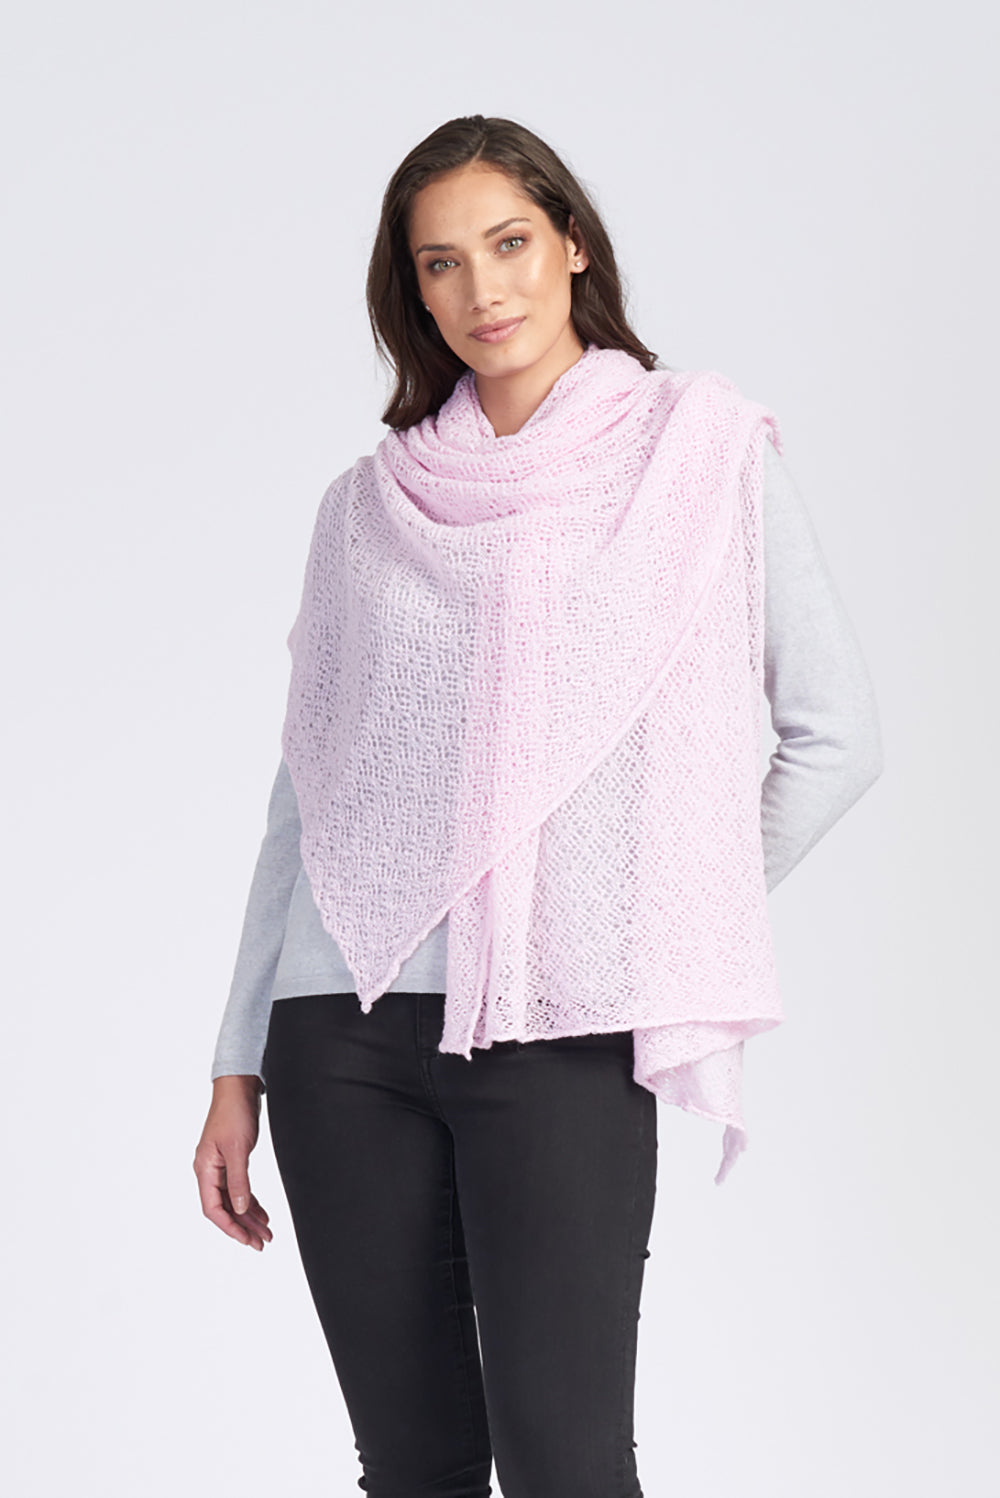 Lace Wrap in Pale Pink by Royal Merino